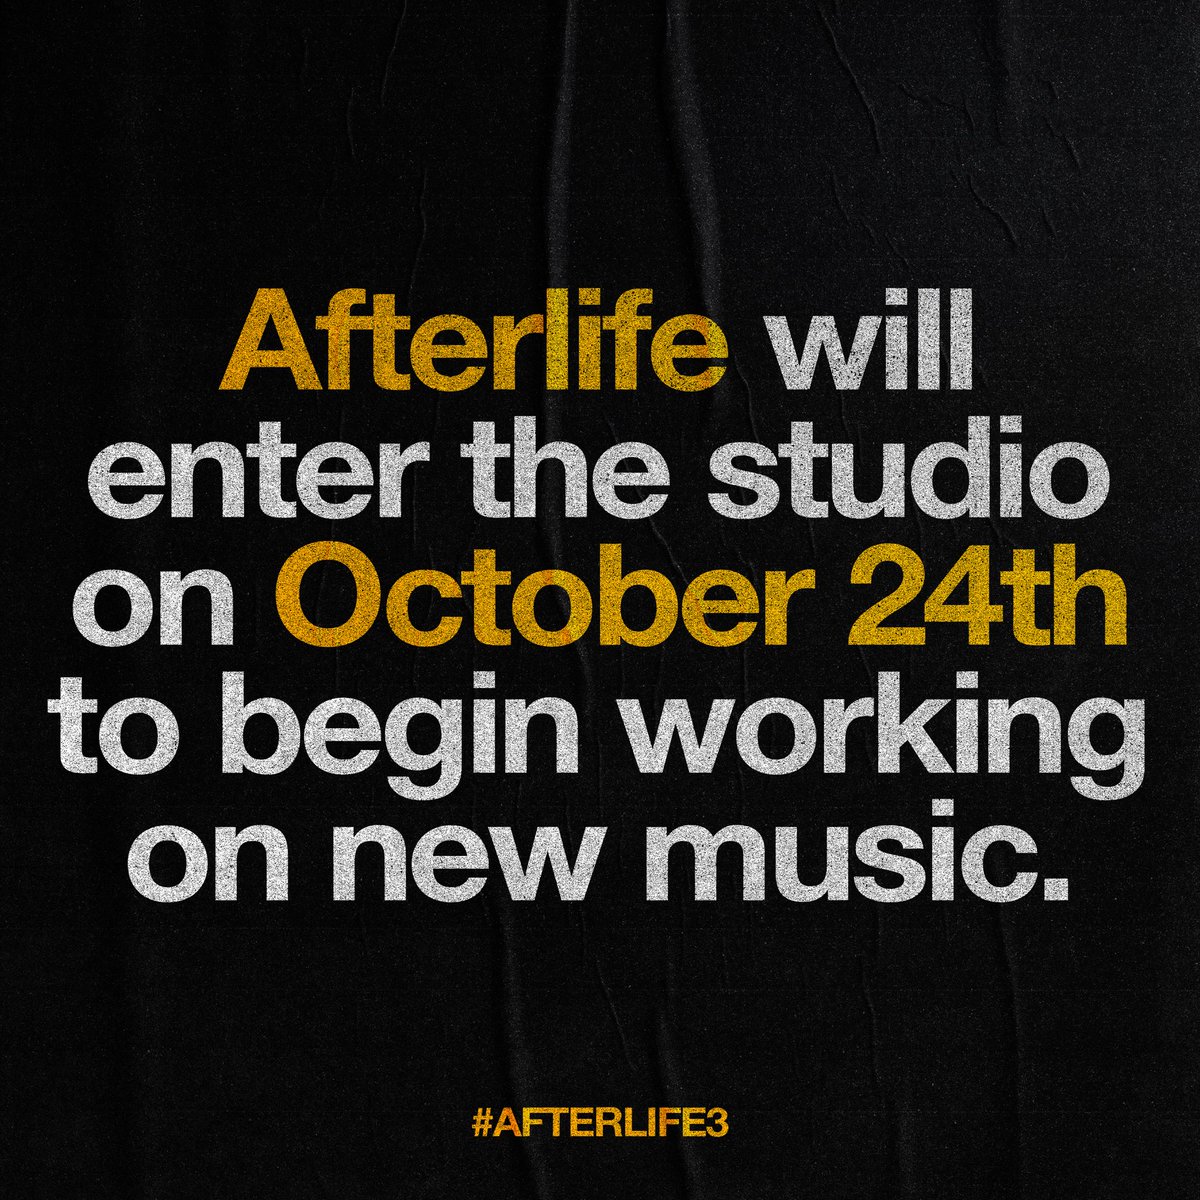 See you soon California! #AFTERLIFE3